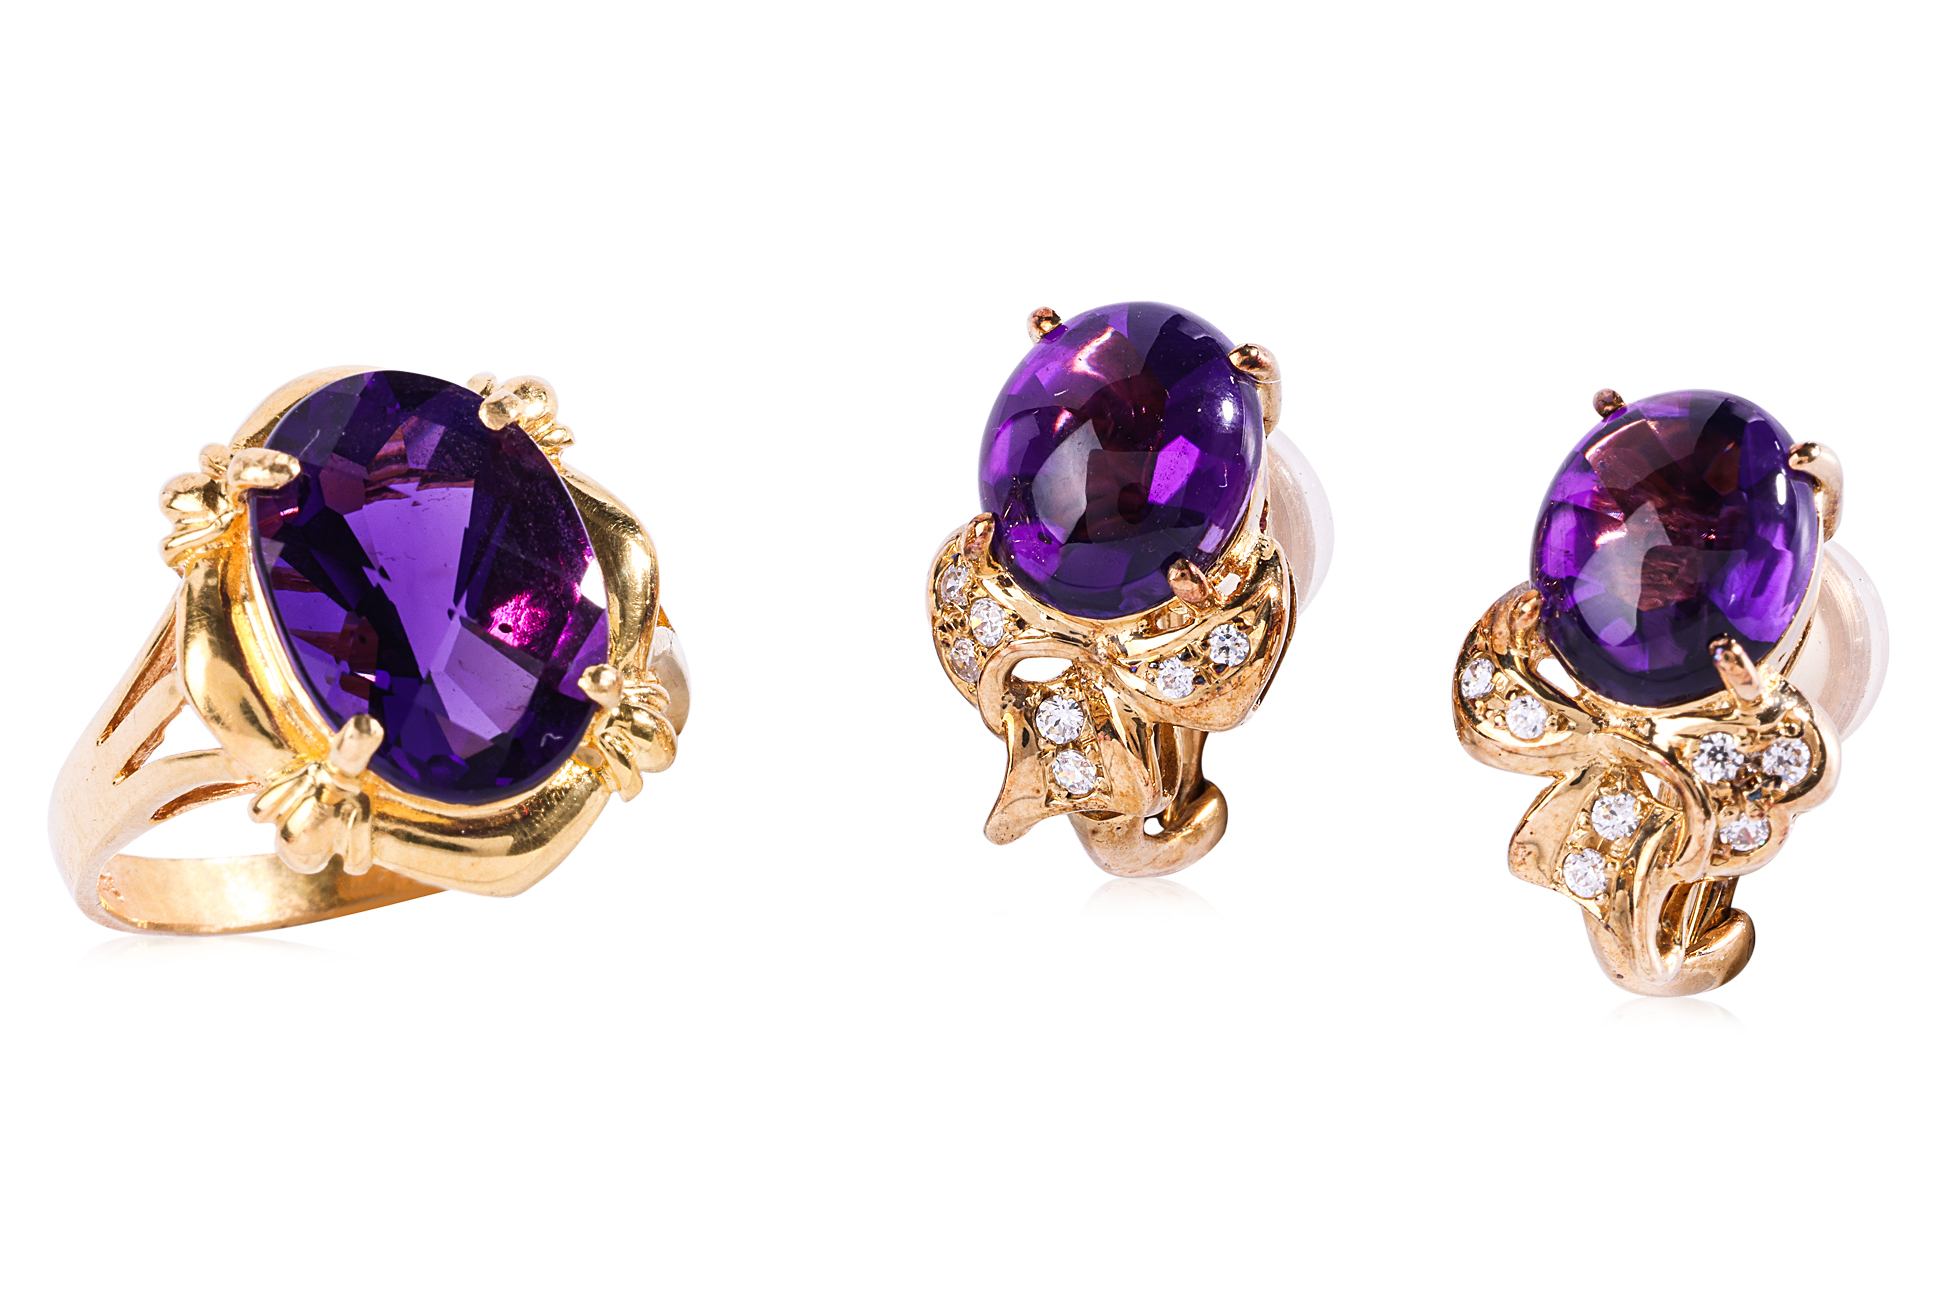 A PAIR OF AMETHYST CLIP EARRINGS AND AN AMETHYST RING